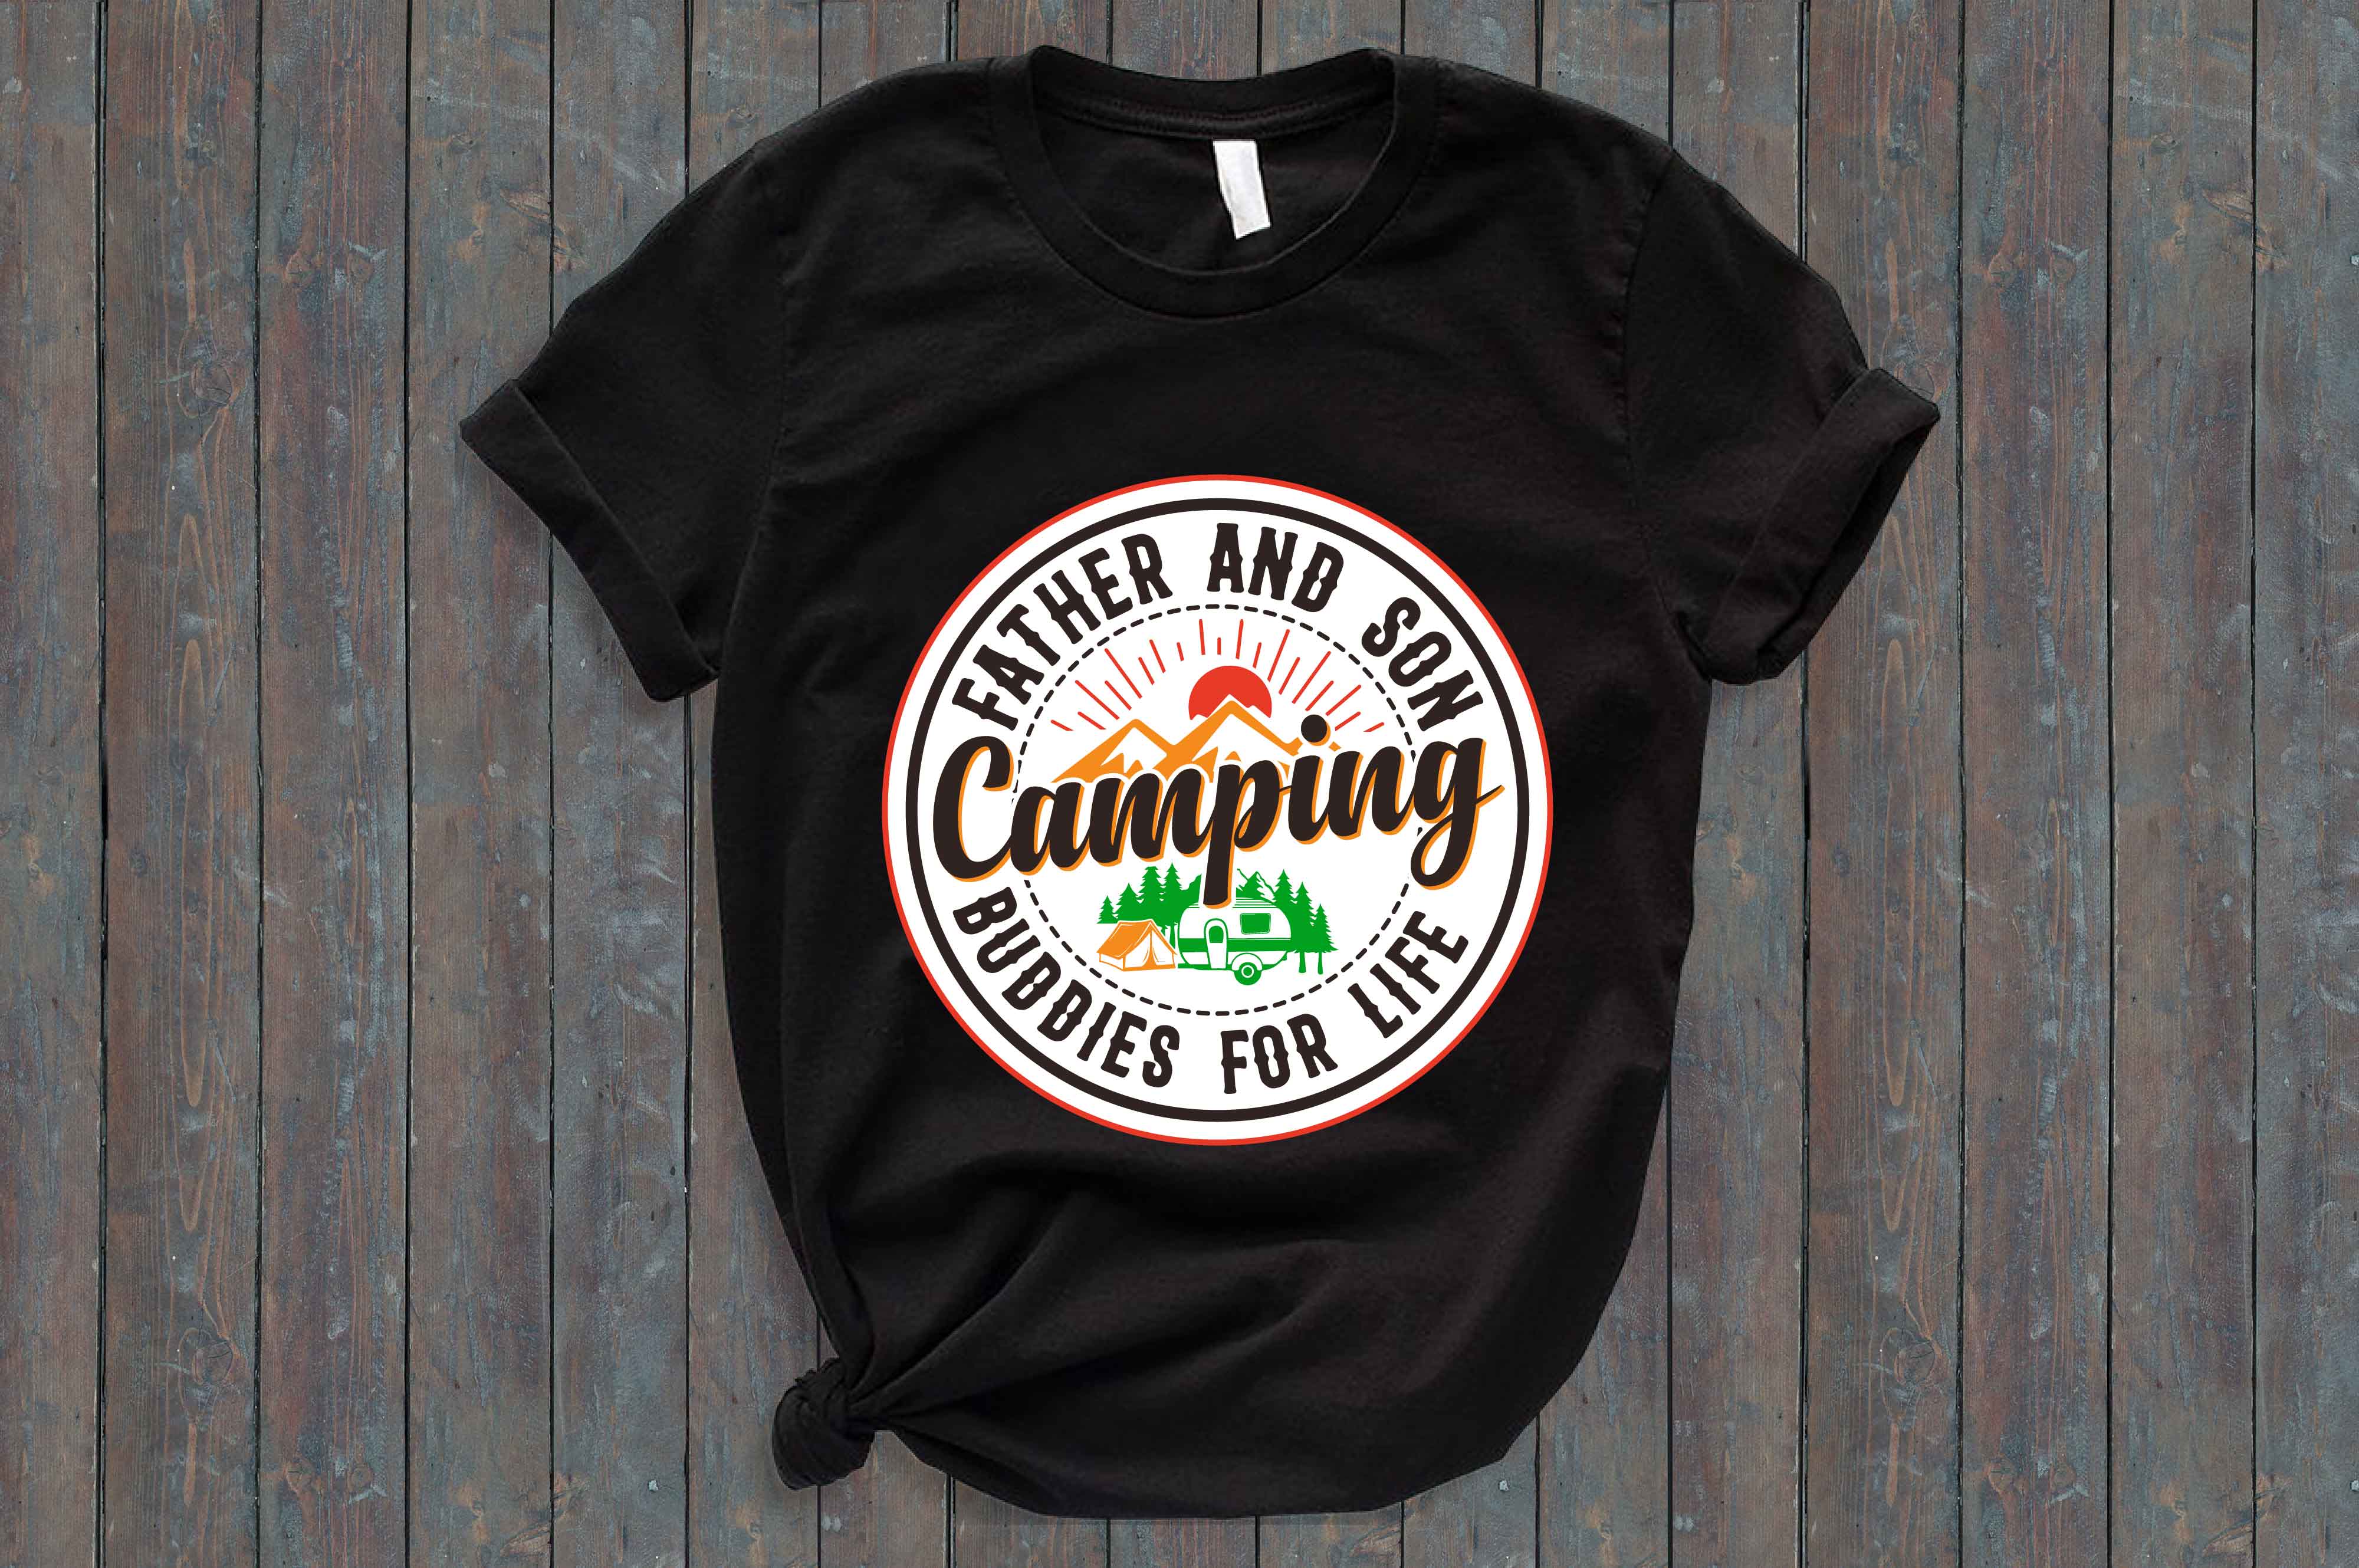 Black t - shirt with a camping logo on it.